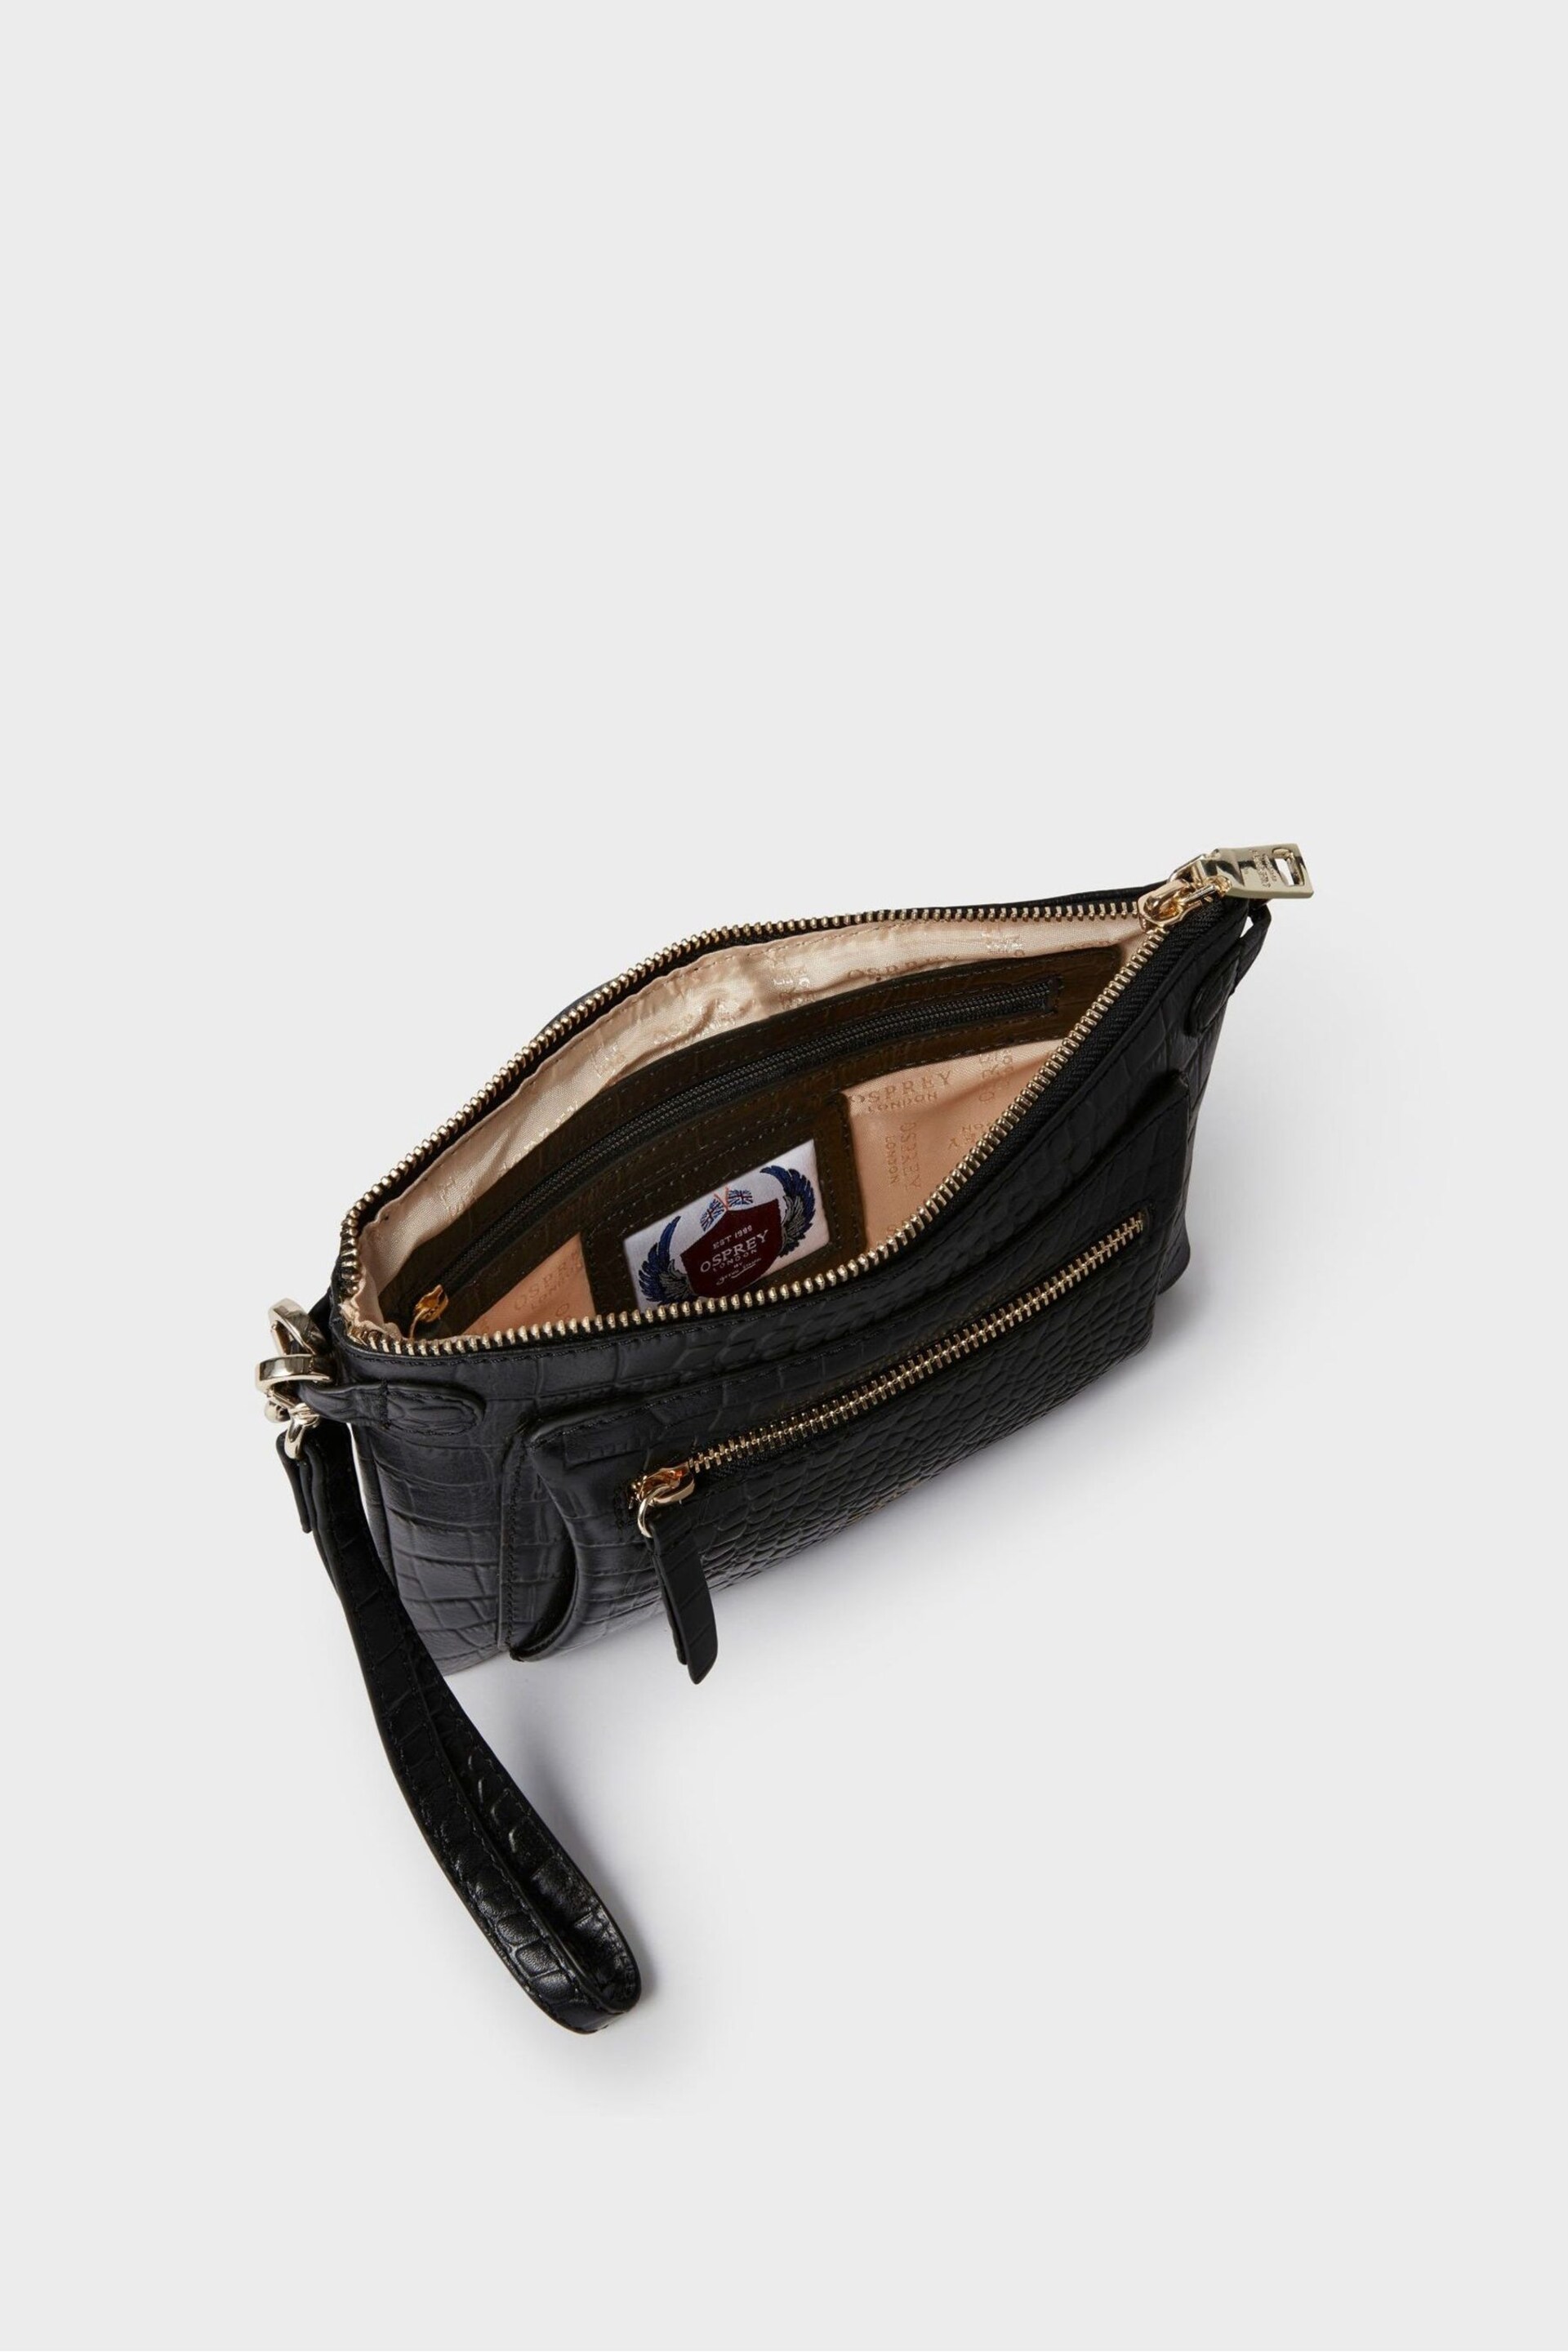 Osprey London  The Ruby Leather Cross-Body Cognac Clutch - Image 3 of 5